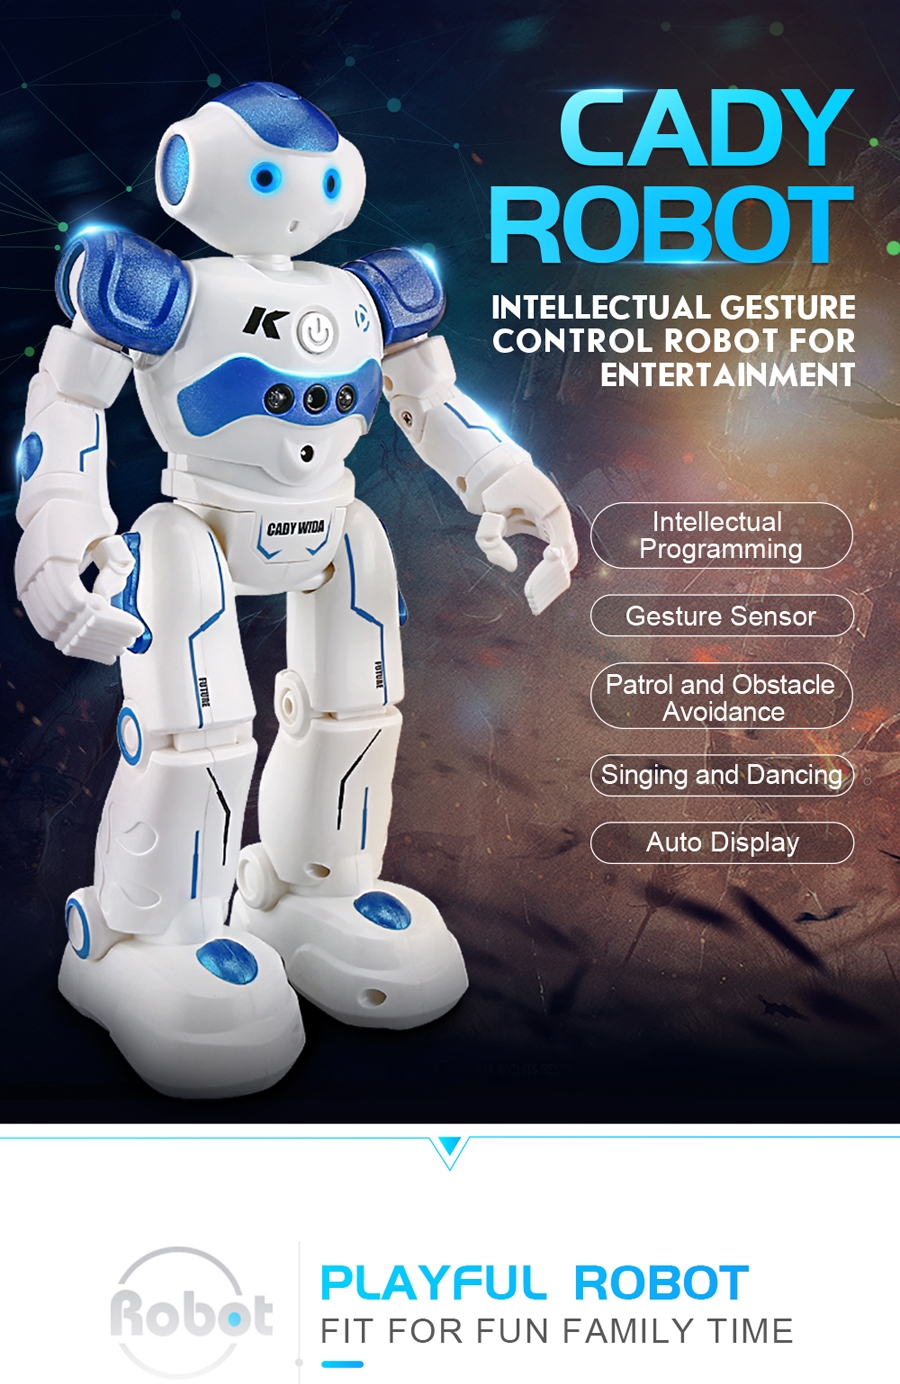 15% OFF for JJRC R2 Cady USB Charging Dancing Gesture Control Robot Toy